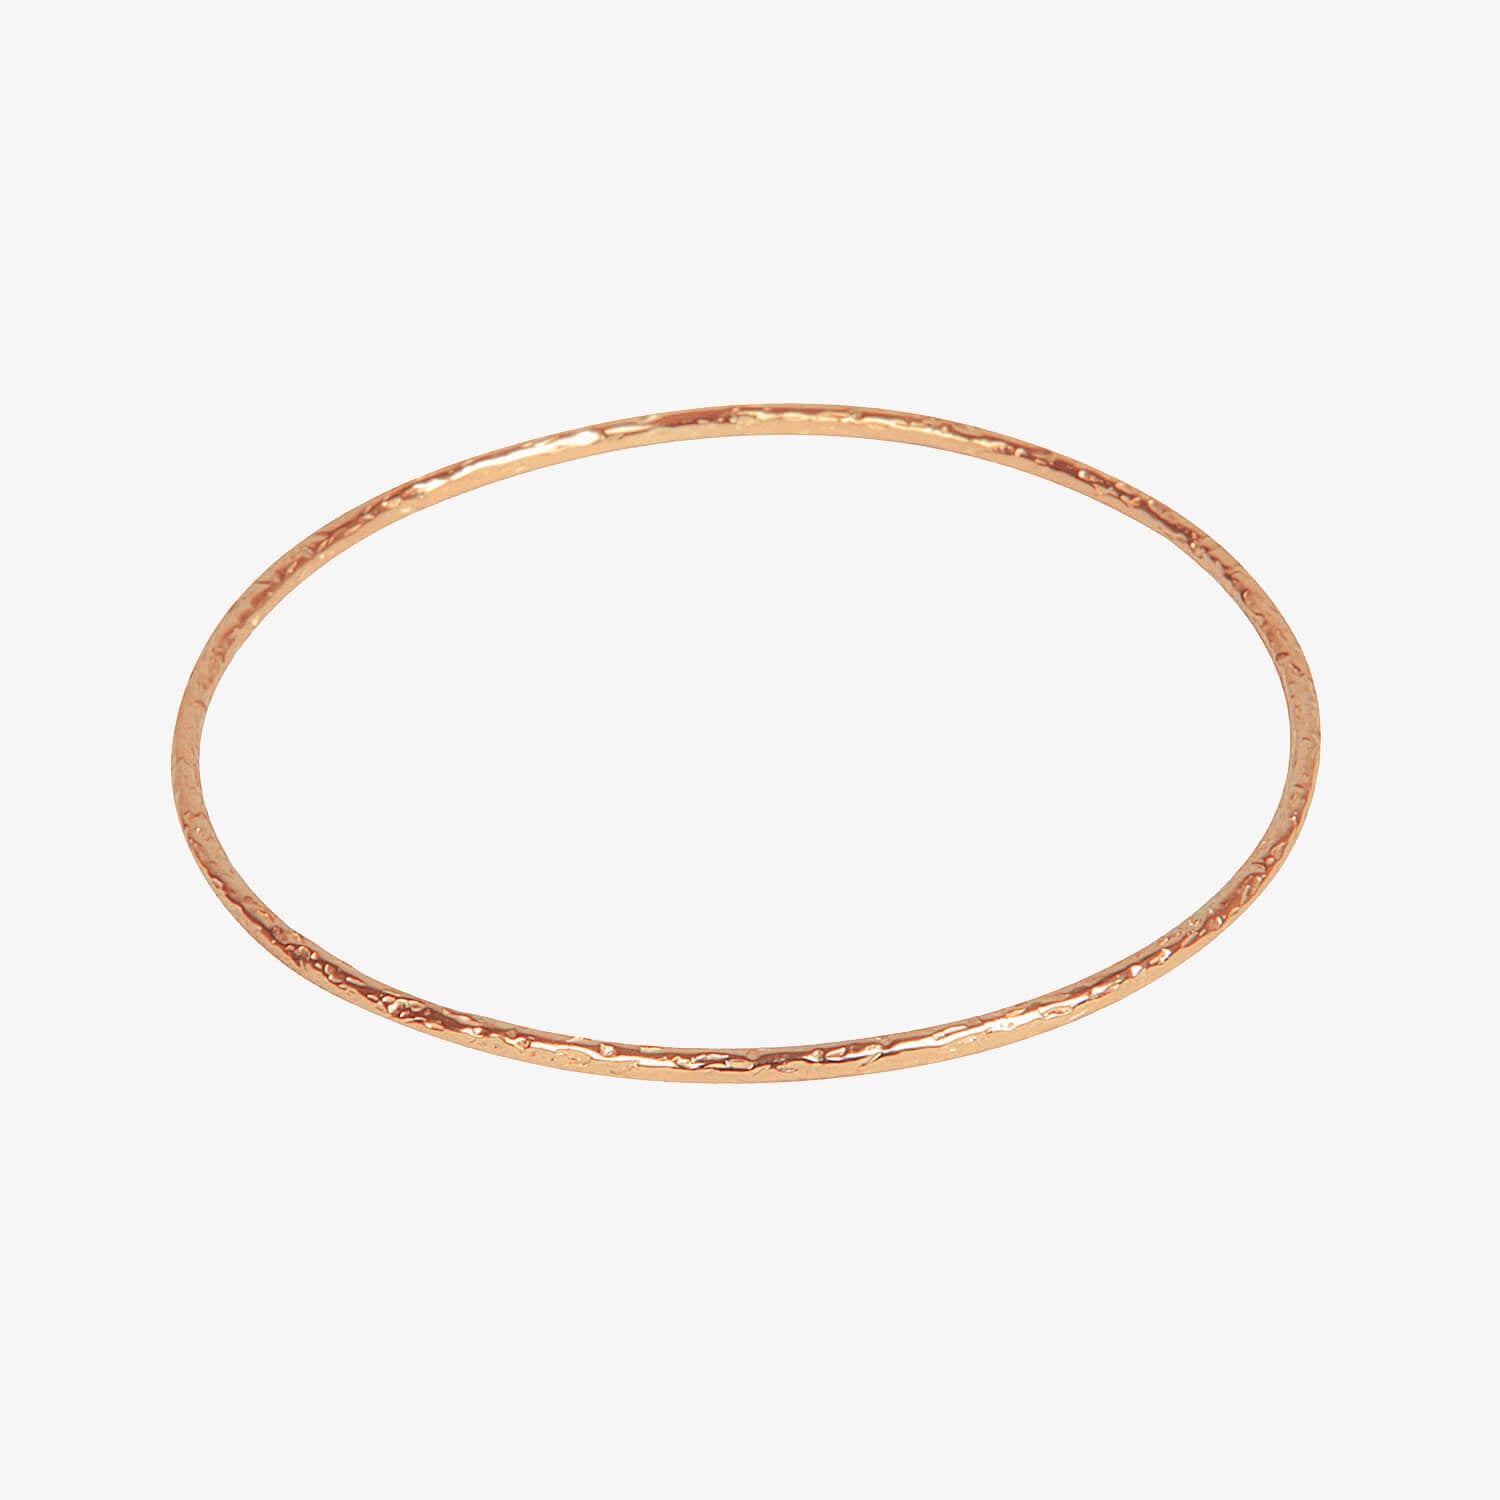 Thin rose gold bangle with meteorite style rough texturing